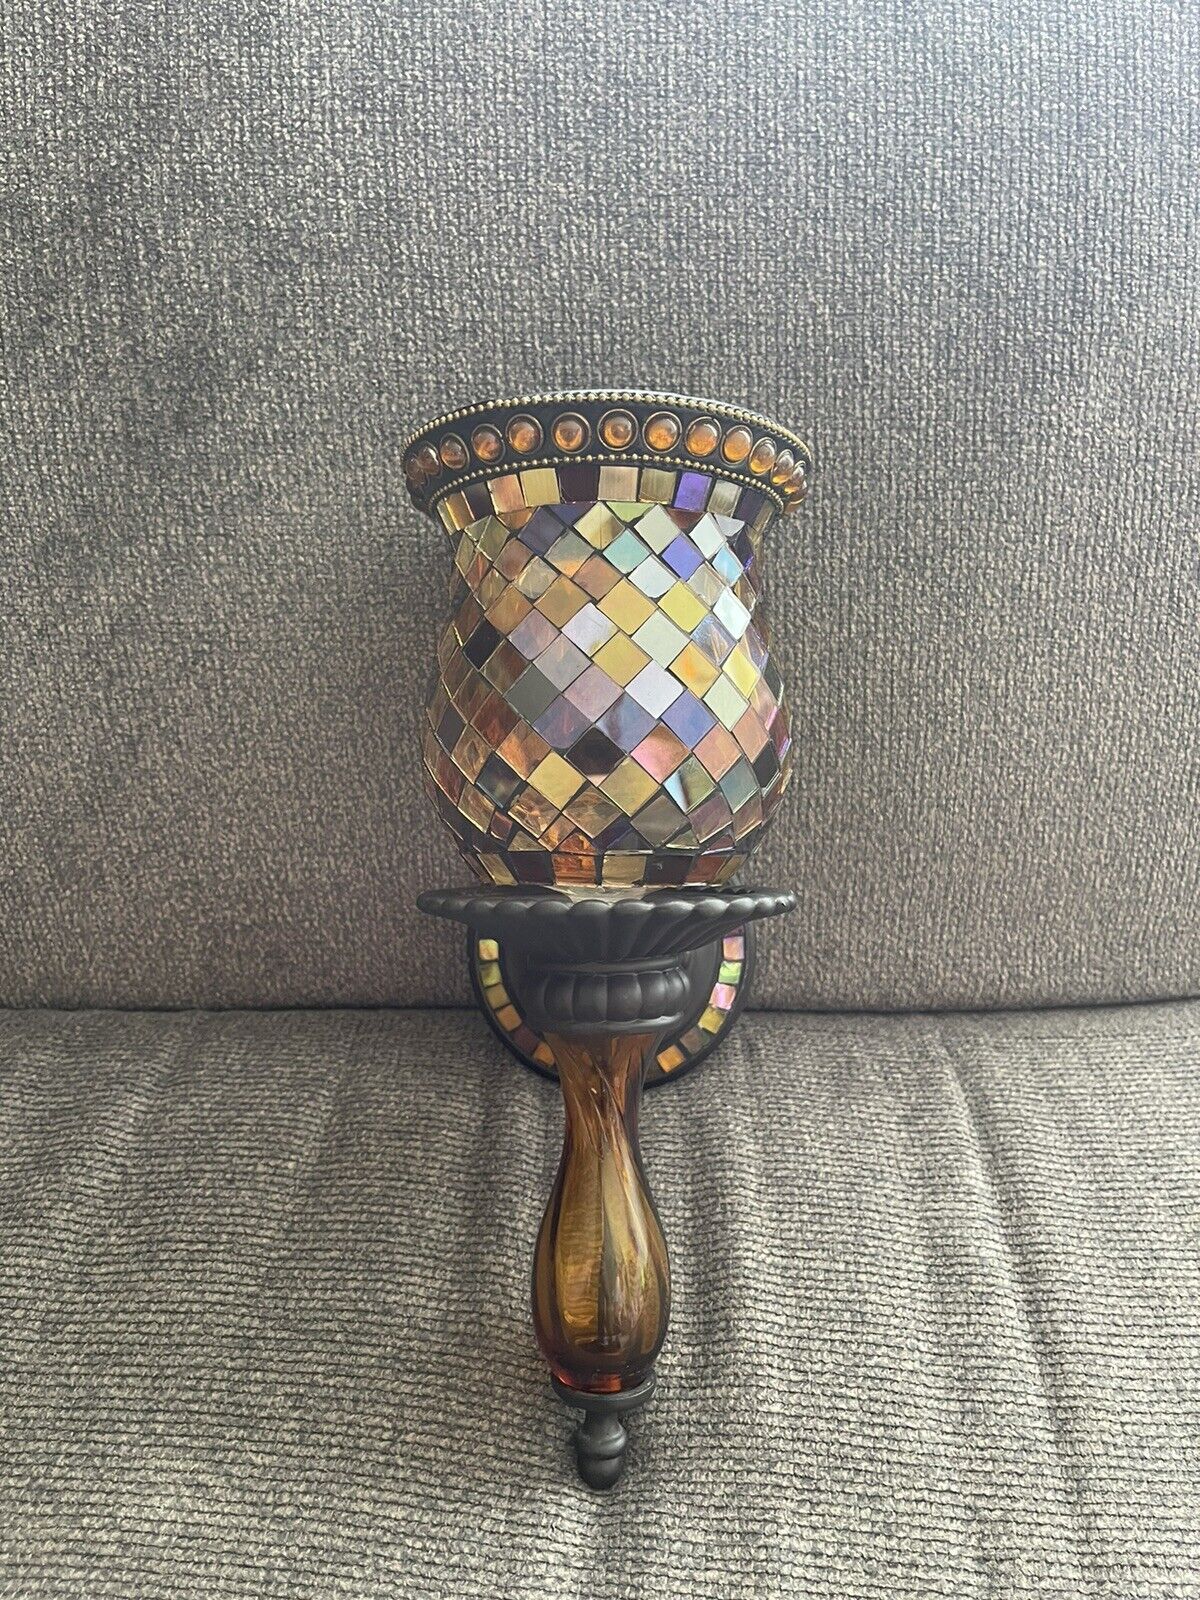 PartyLite GLOBAL FUSION Mosaic Tile Glass Sconce